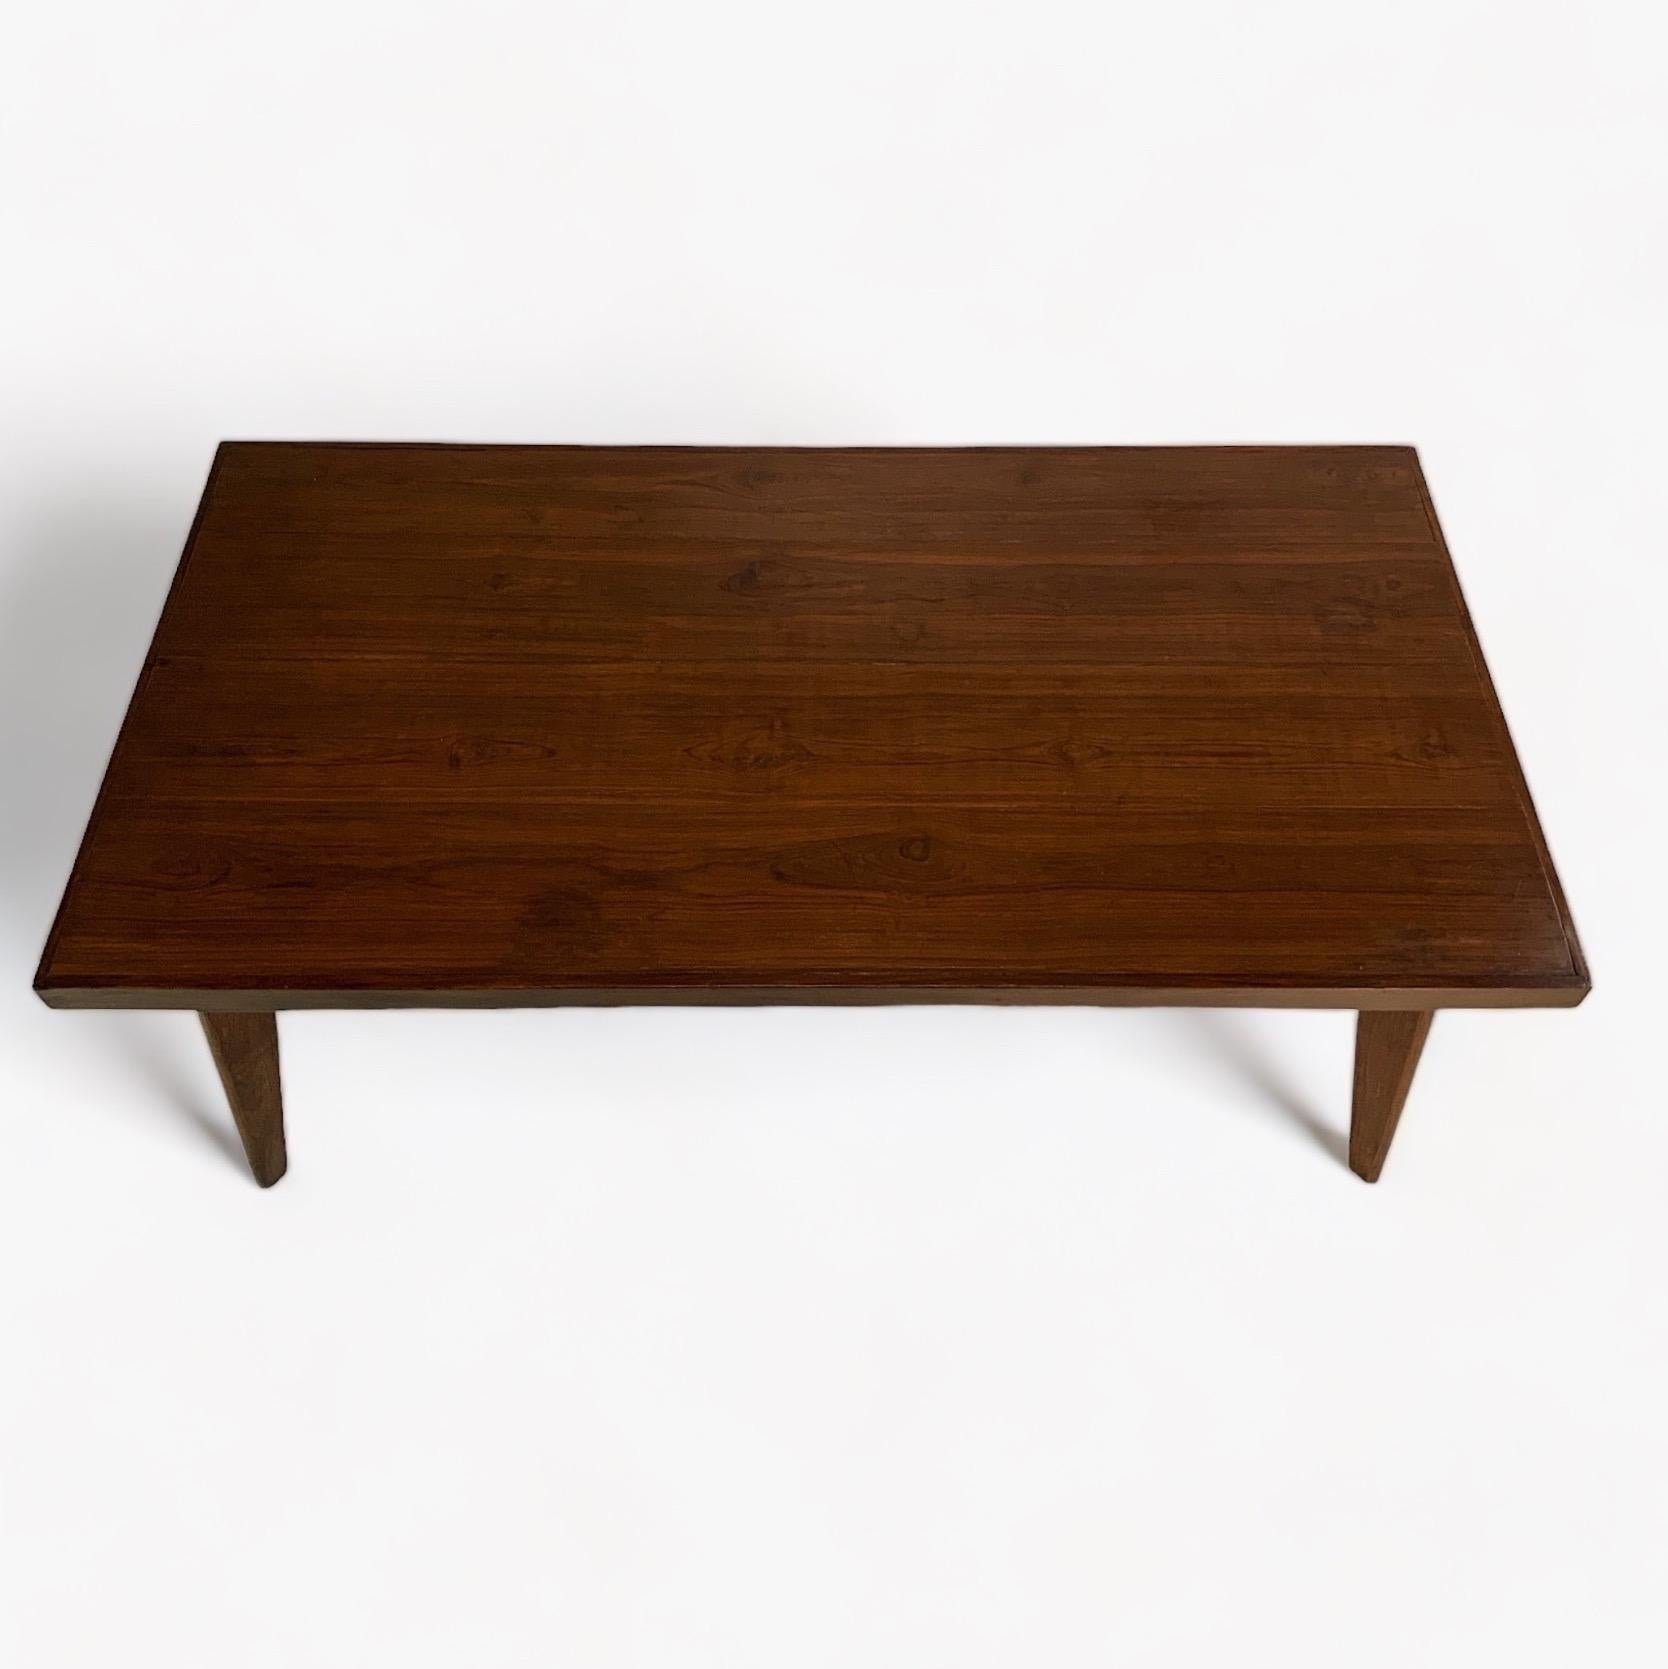 Exceptionally rare and important Pierre Jeanneret Rosewood table, model PJ-TA-01-A, circa 1962. 

Provenance documents available. 

This model—often made in teak and occasionally painted black— appeared in student dining halls, cafeterias, and